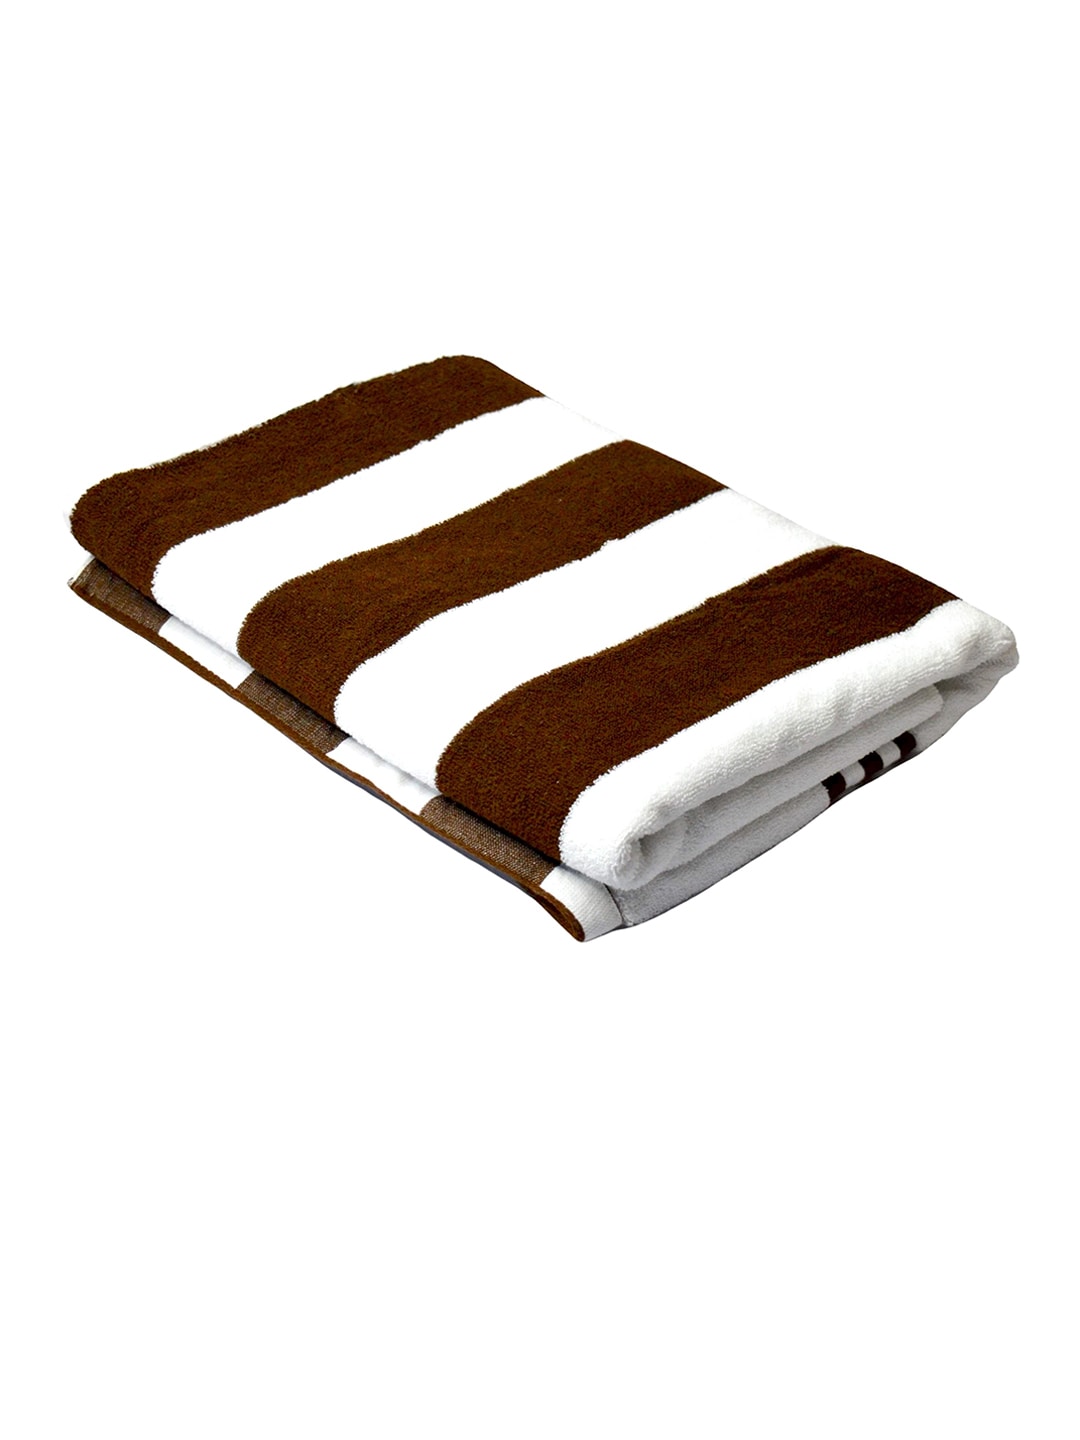 Tranquil square Brown & White Striped 650 GSM Cotton Bath Towel Price in India